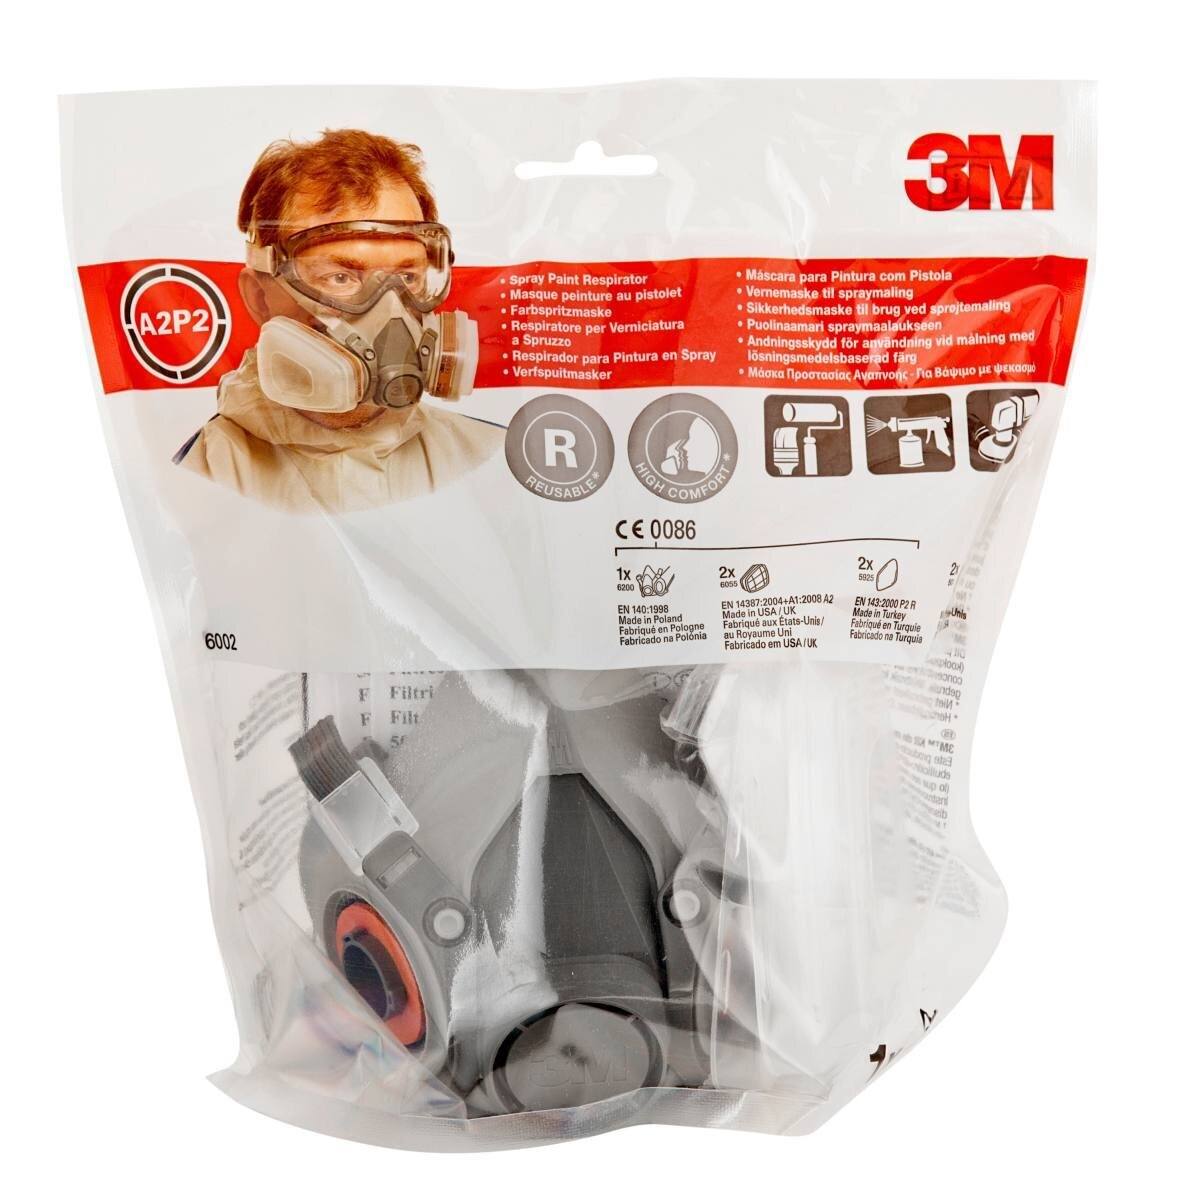 3M 6000 set 1x 3M 6200M half mask, 2x 6055 A2 filter, 2x 5925 P2R particle filter, 2x 501 filter cover